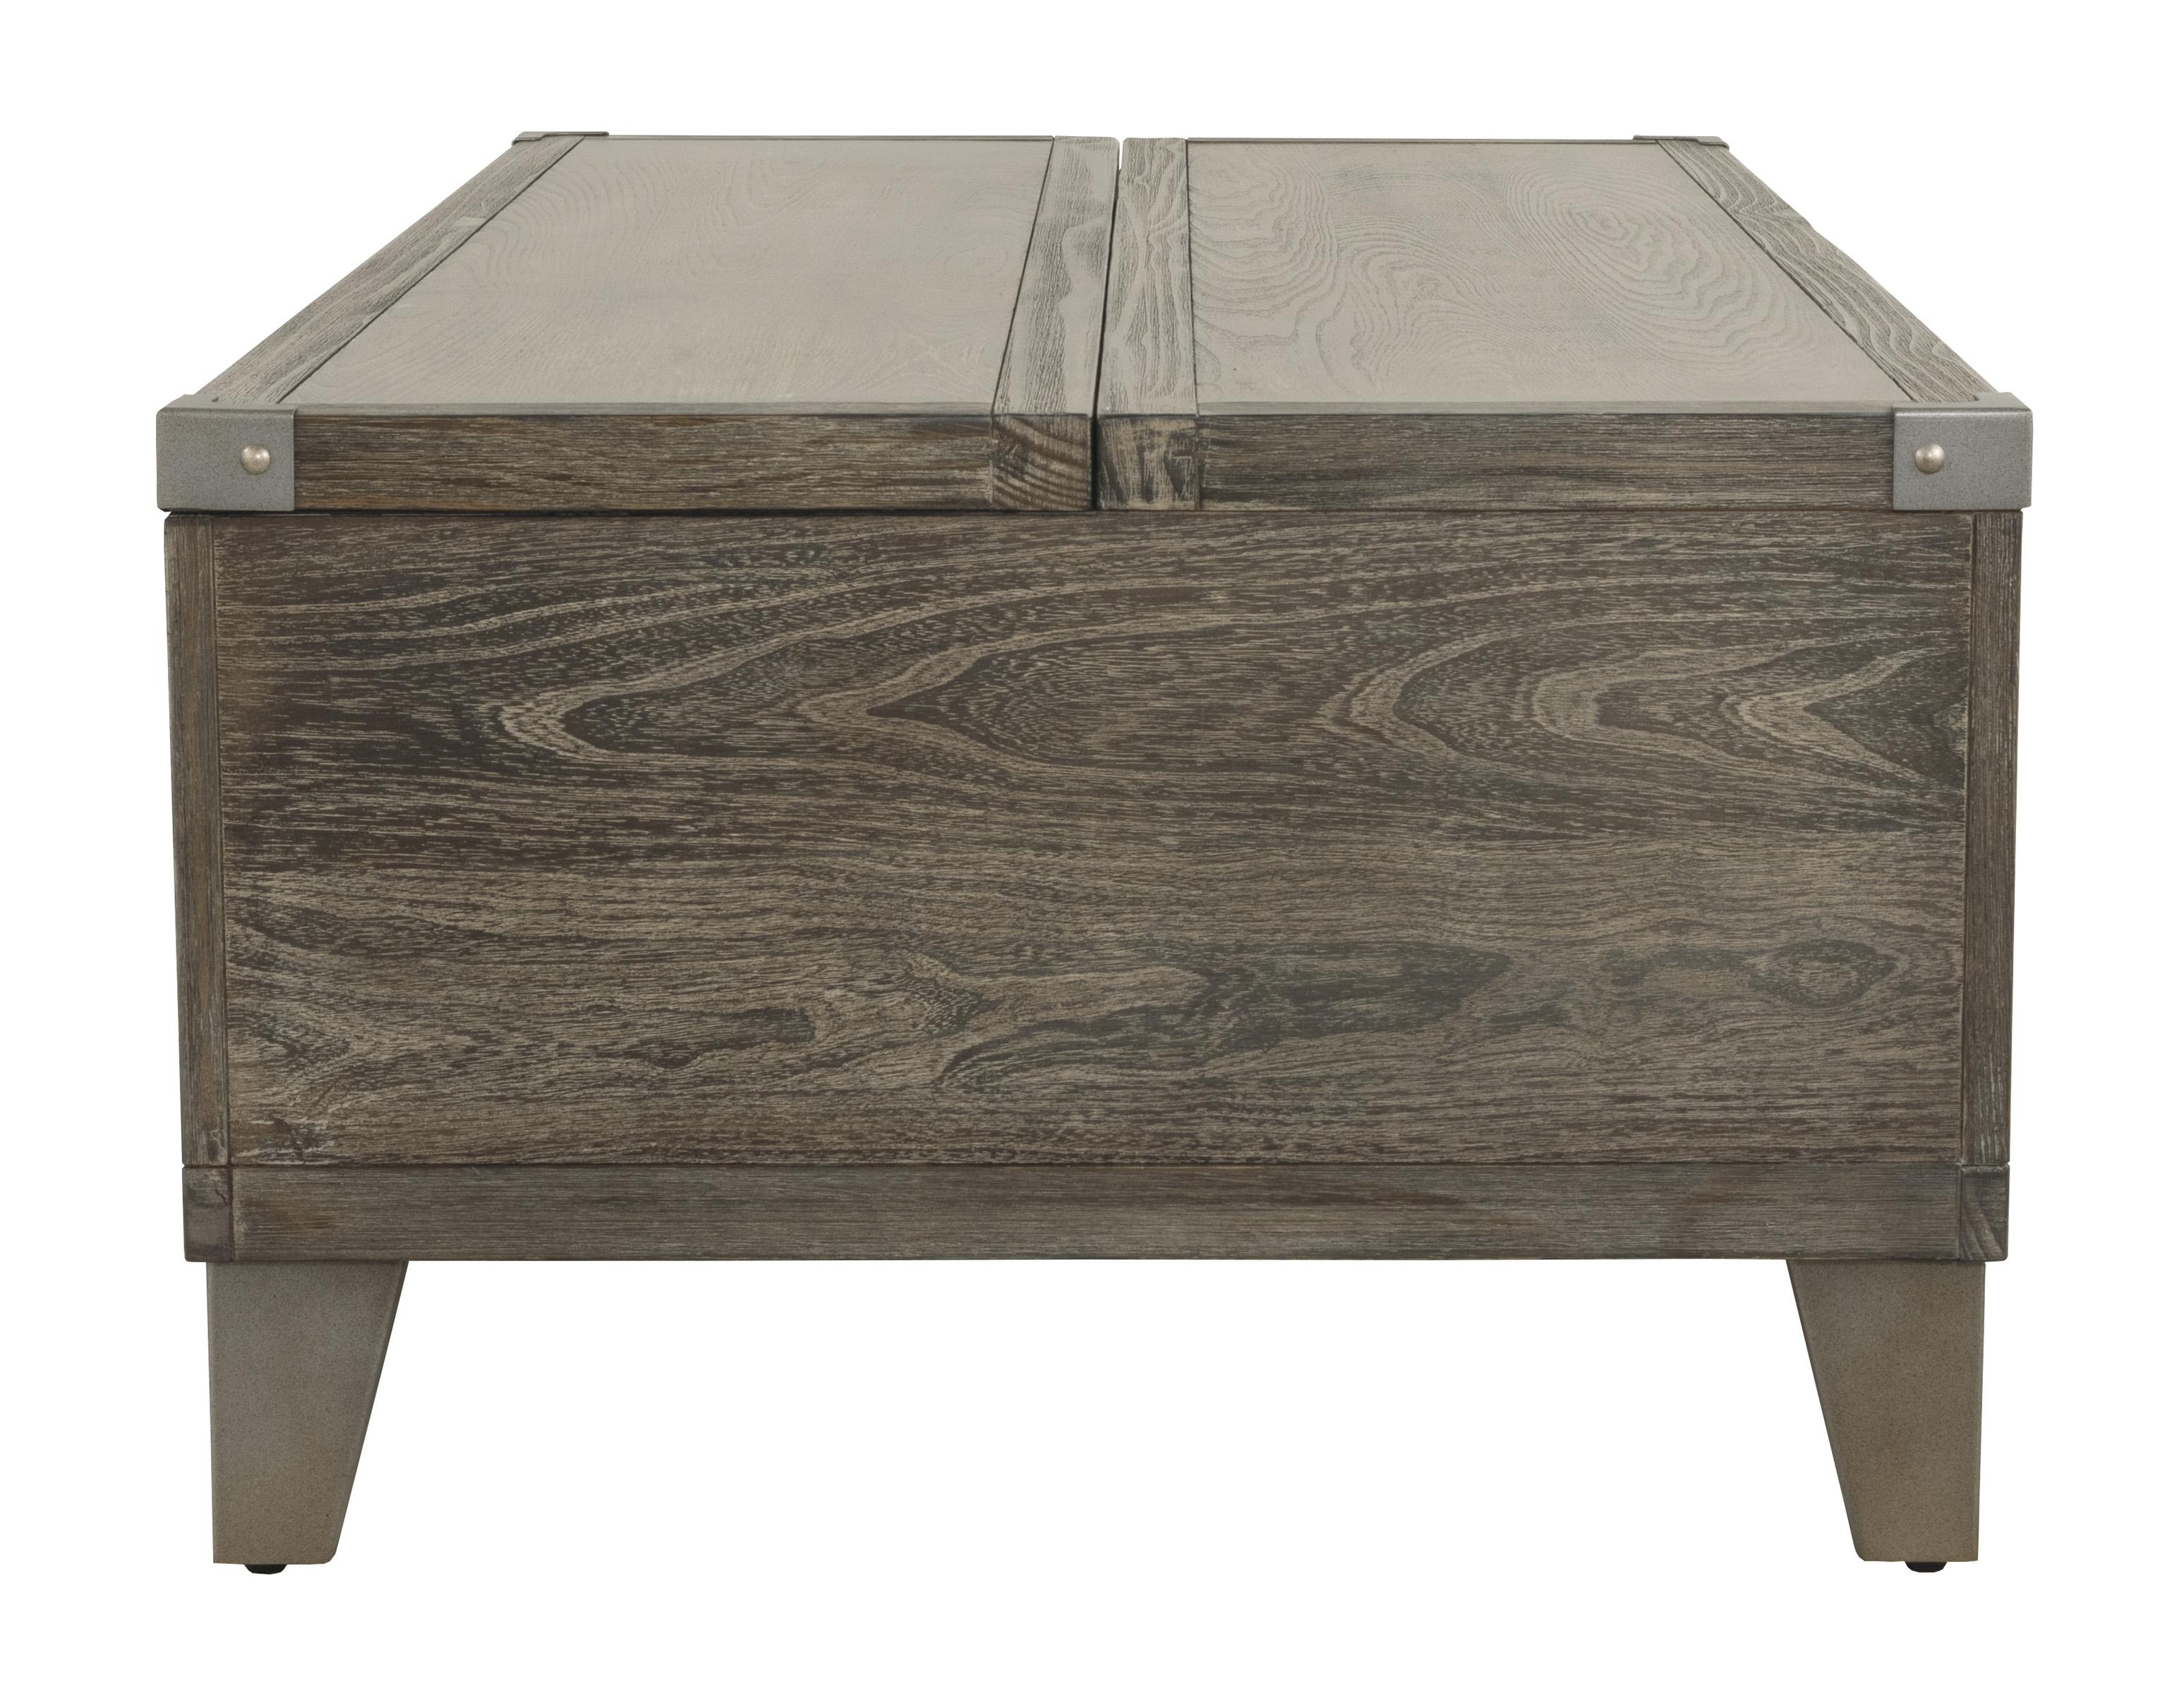 2 Drawer Wooden Lift Top Cocktail Table With Metal Accents, Brown- Saltoro Sherpi